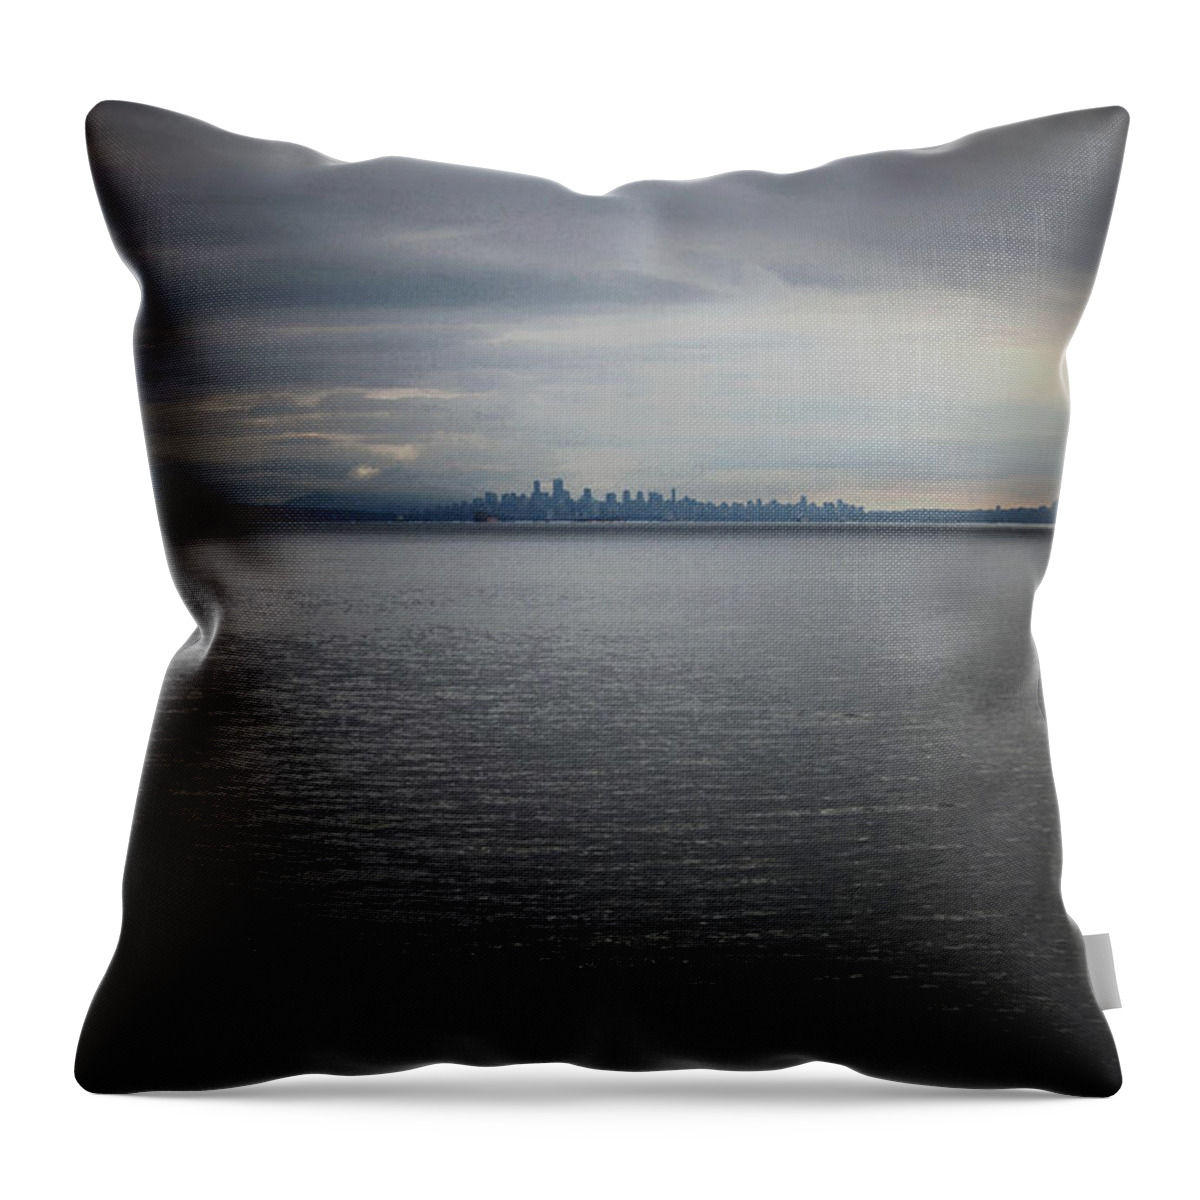 Horseshoe Bay Throw Pillow featuring the photograph Approaching Vancouver by Richard Andrews